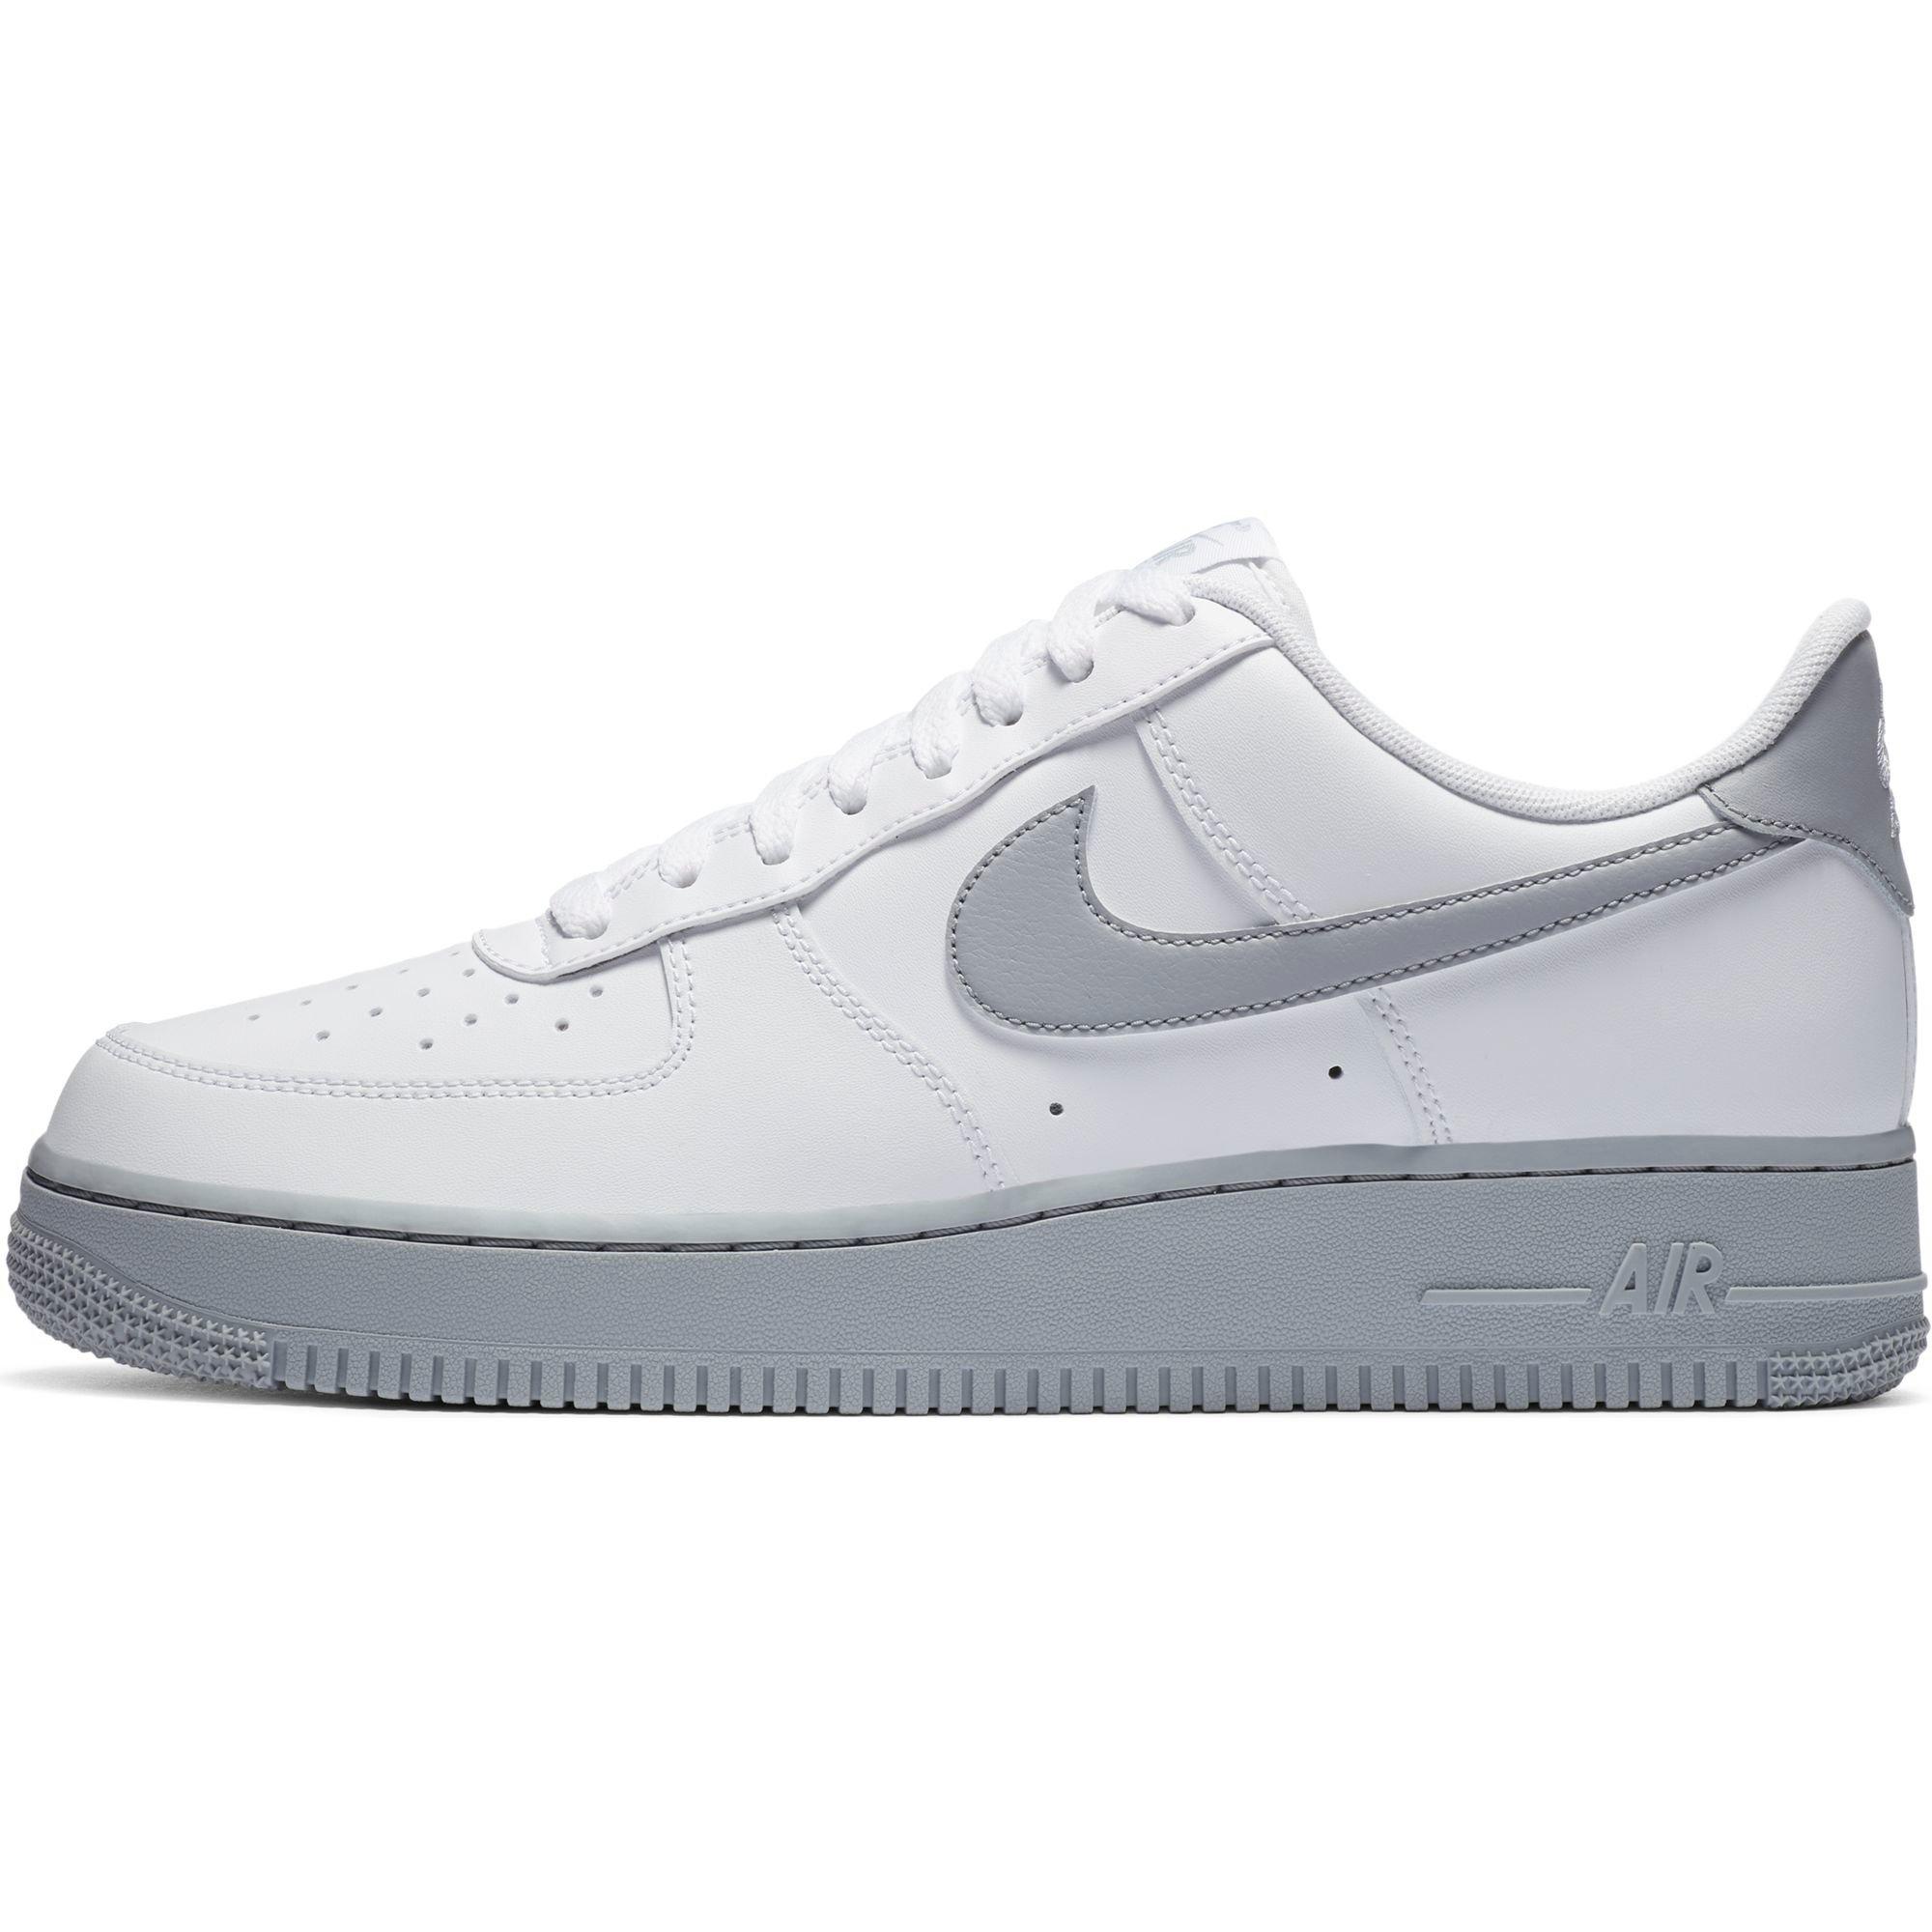 🔥🔥 NEW NIKE AIR FORCE 1 '07 LV8 SE GREY REFLECTIVE SUEDE MENS SIZING 🔥🔥